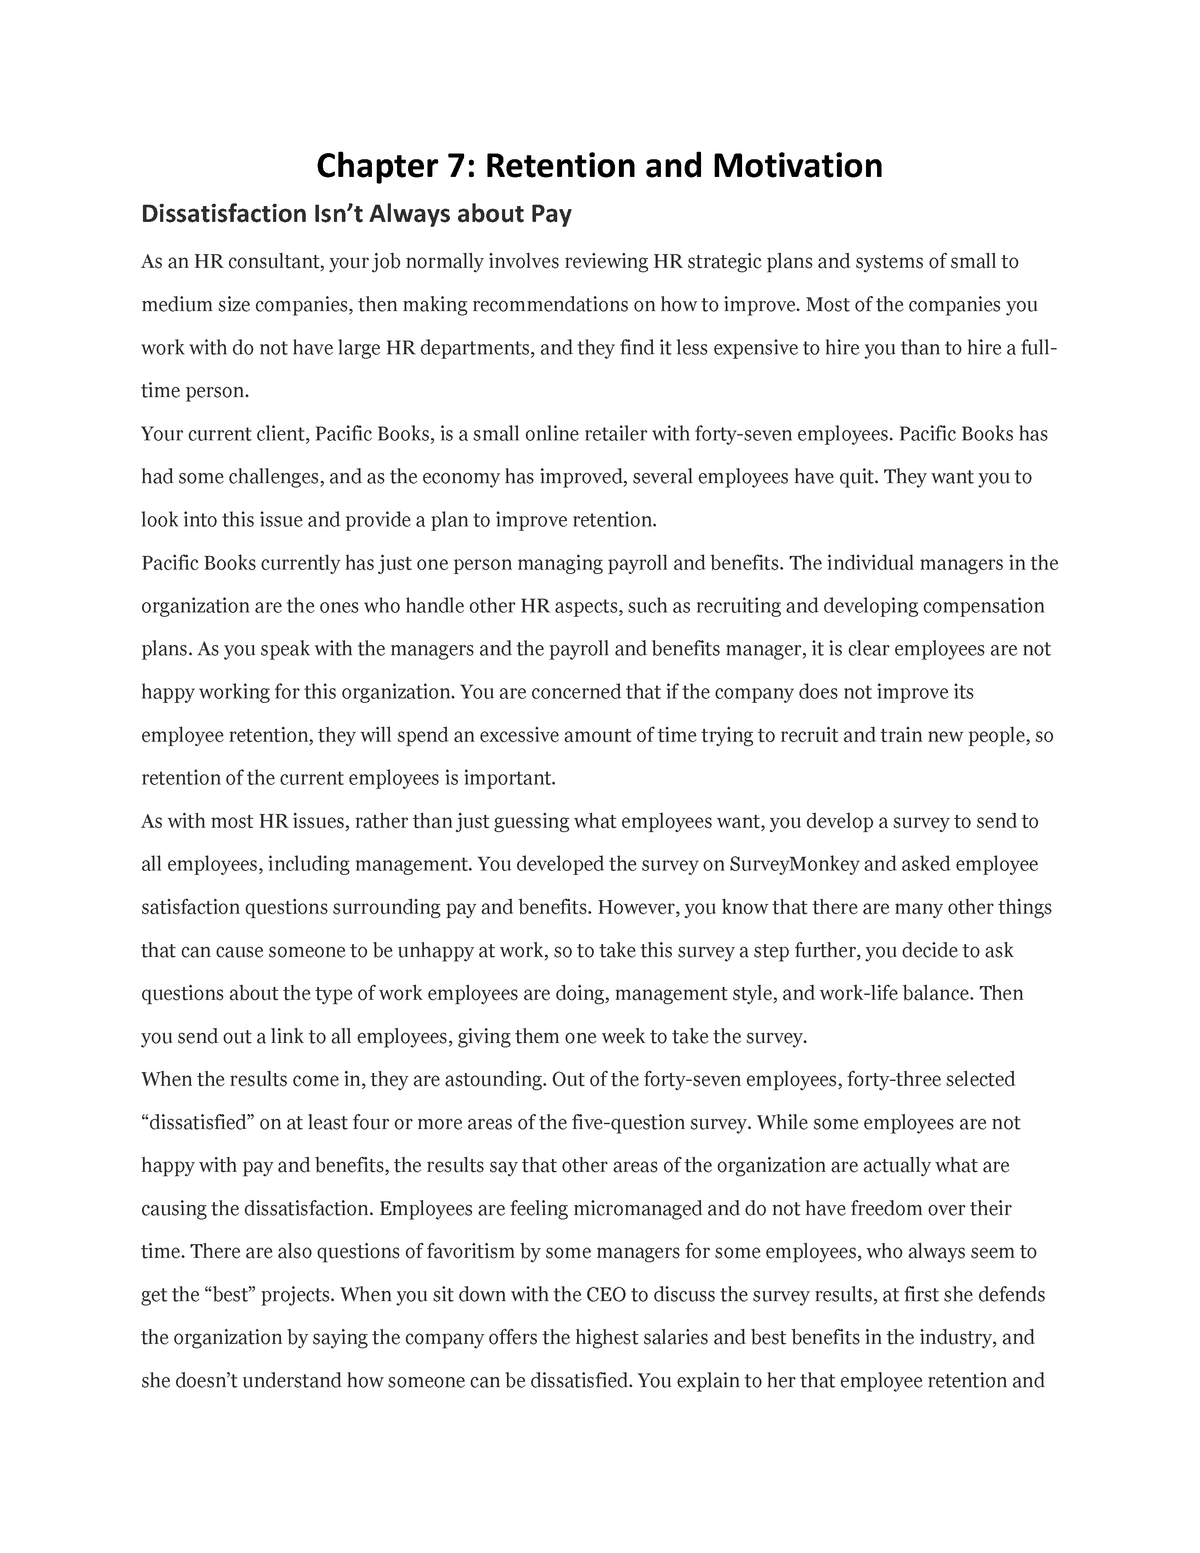 essay about retention and motivation